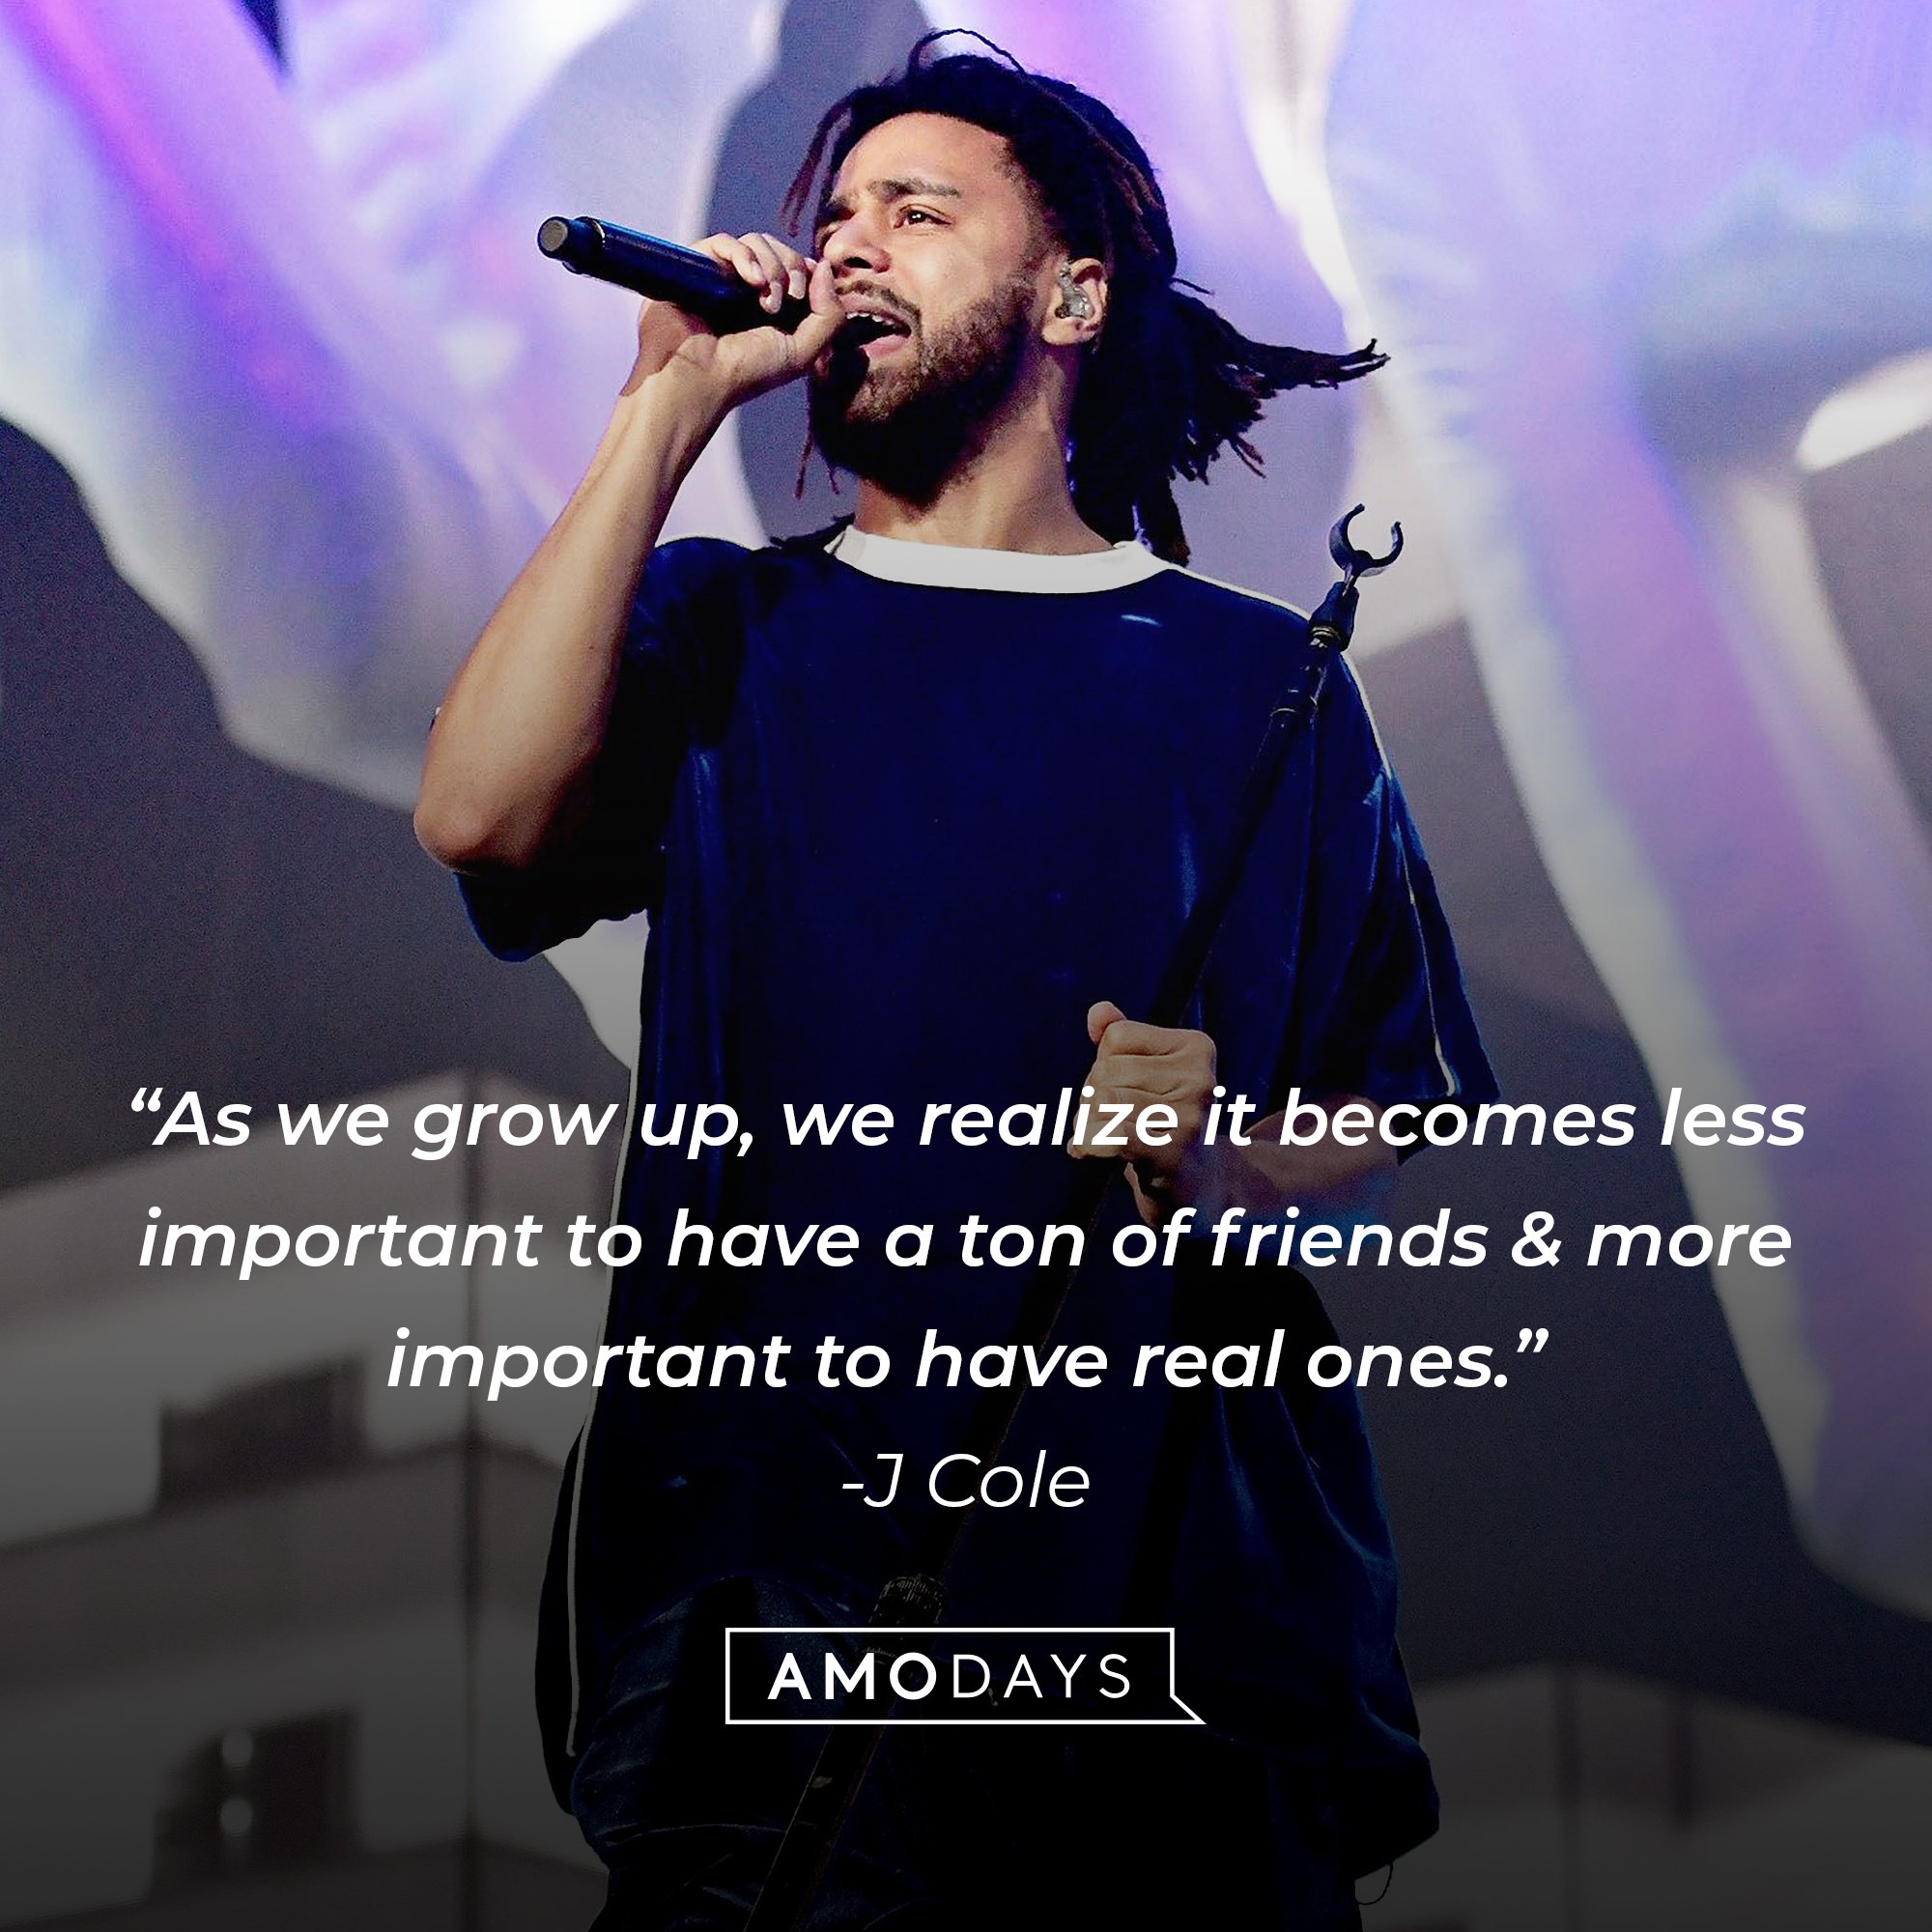 J Cole's quote: “As we grow up, we realize it becomes less important to have a ton of friends & more important to have real ones.” | Image: AmoDays